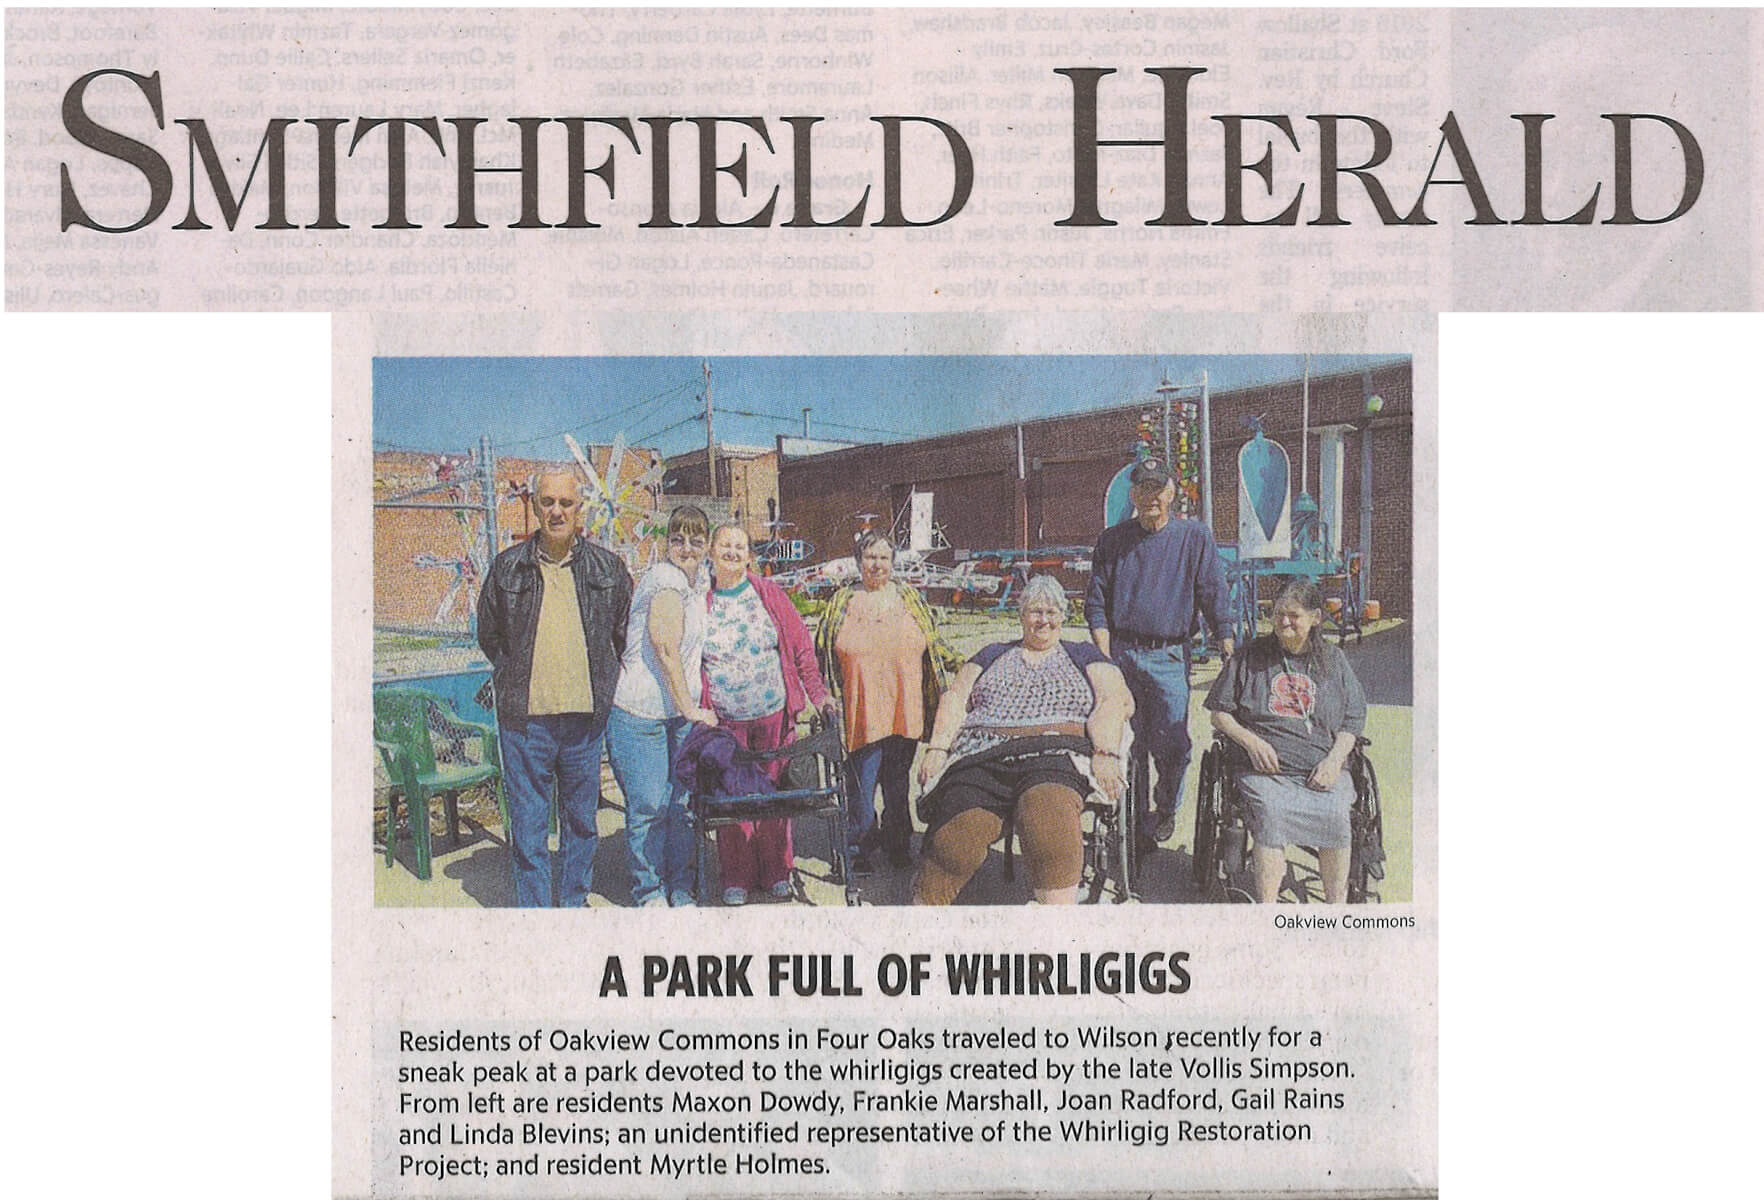 A DePaul Senior Living Community Visits Whirligigs Story in the Smithfield Herald 